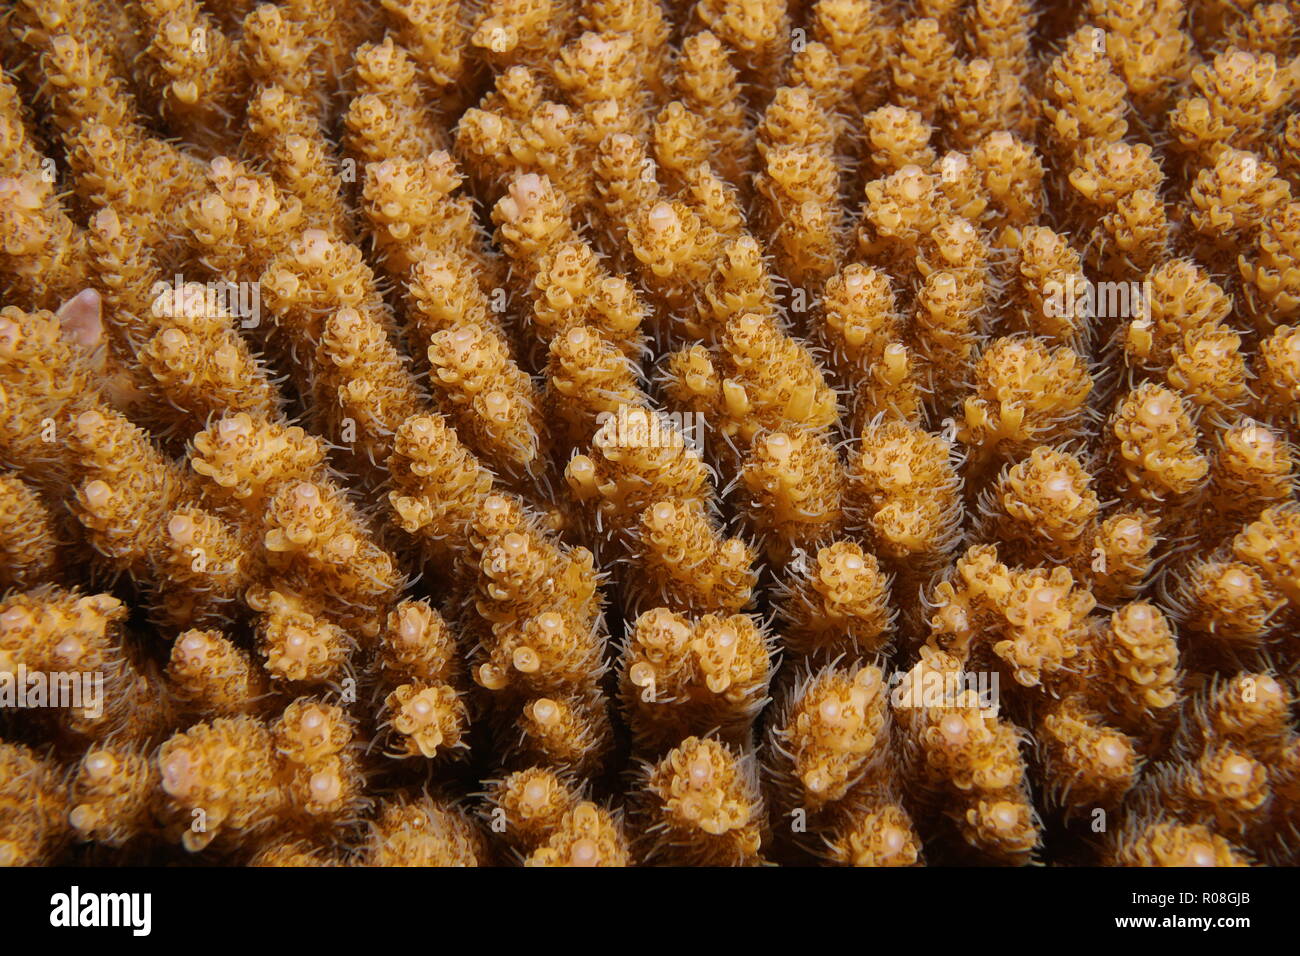 Table coral Acropora hyacinthus, close-up underwater, Tahiti, Pacific ocean, French Polynesia Stock Photo